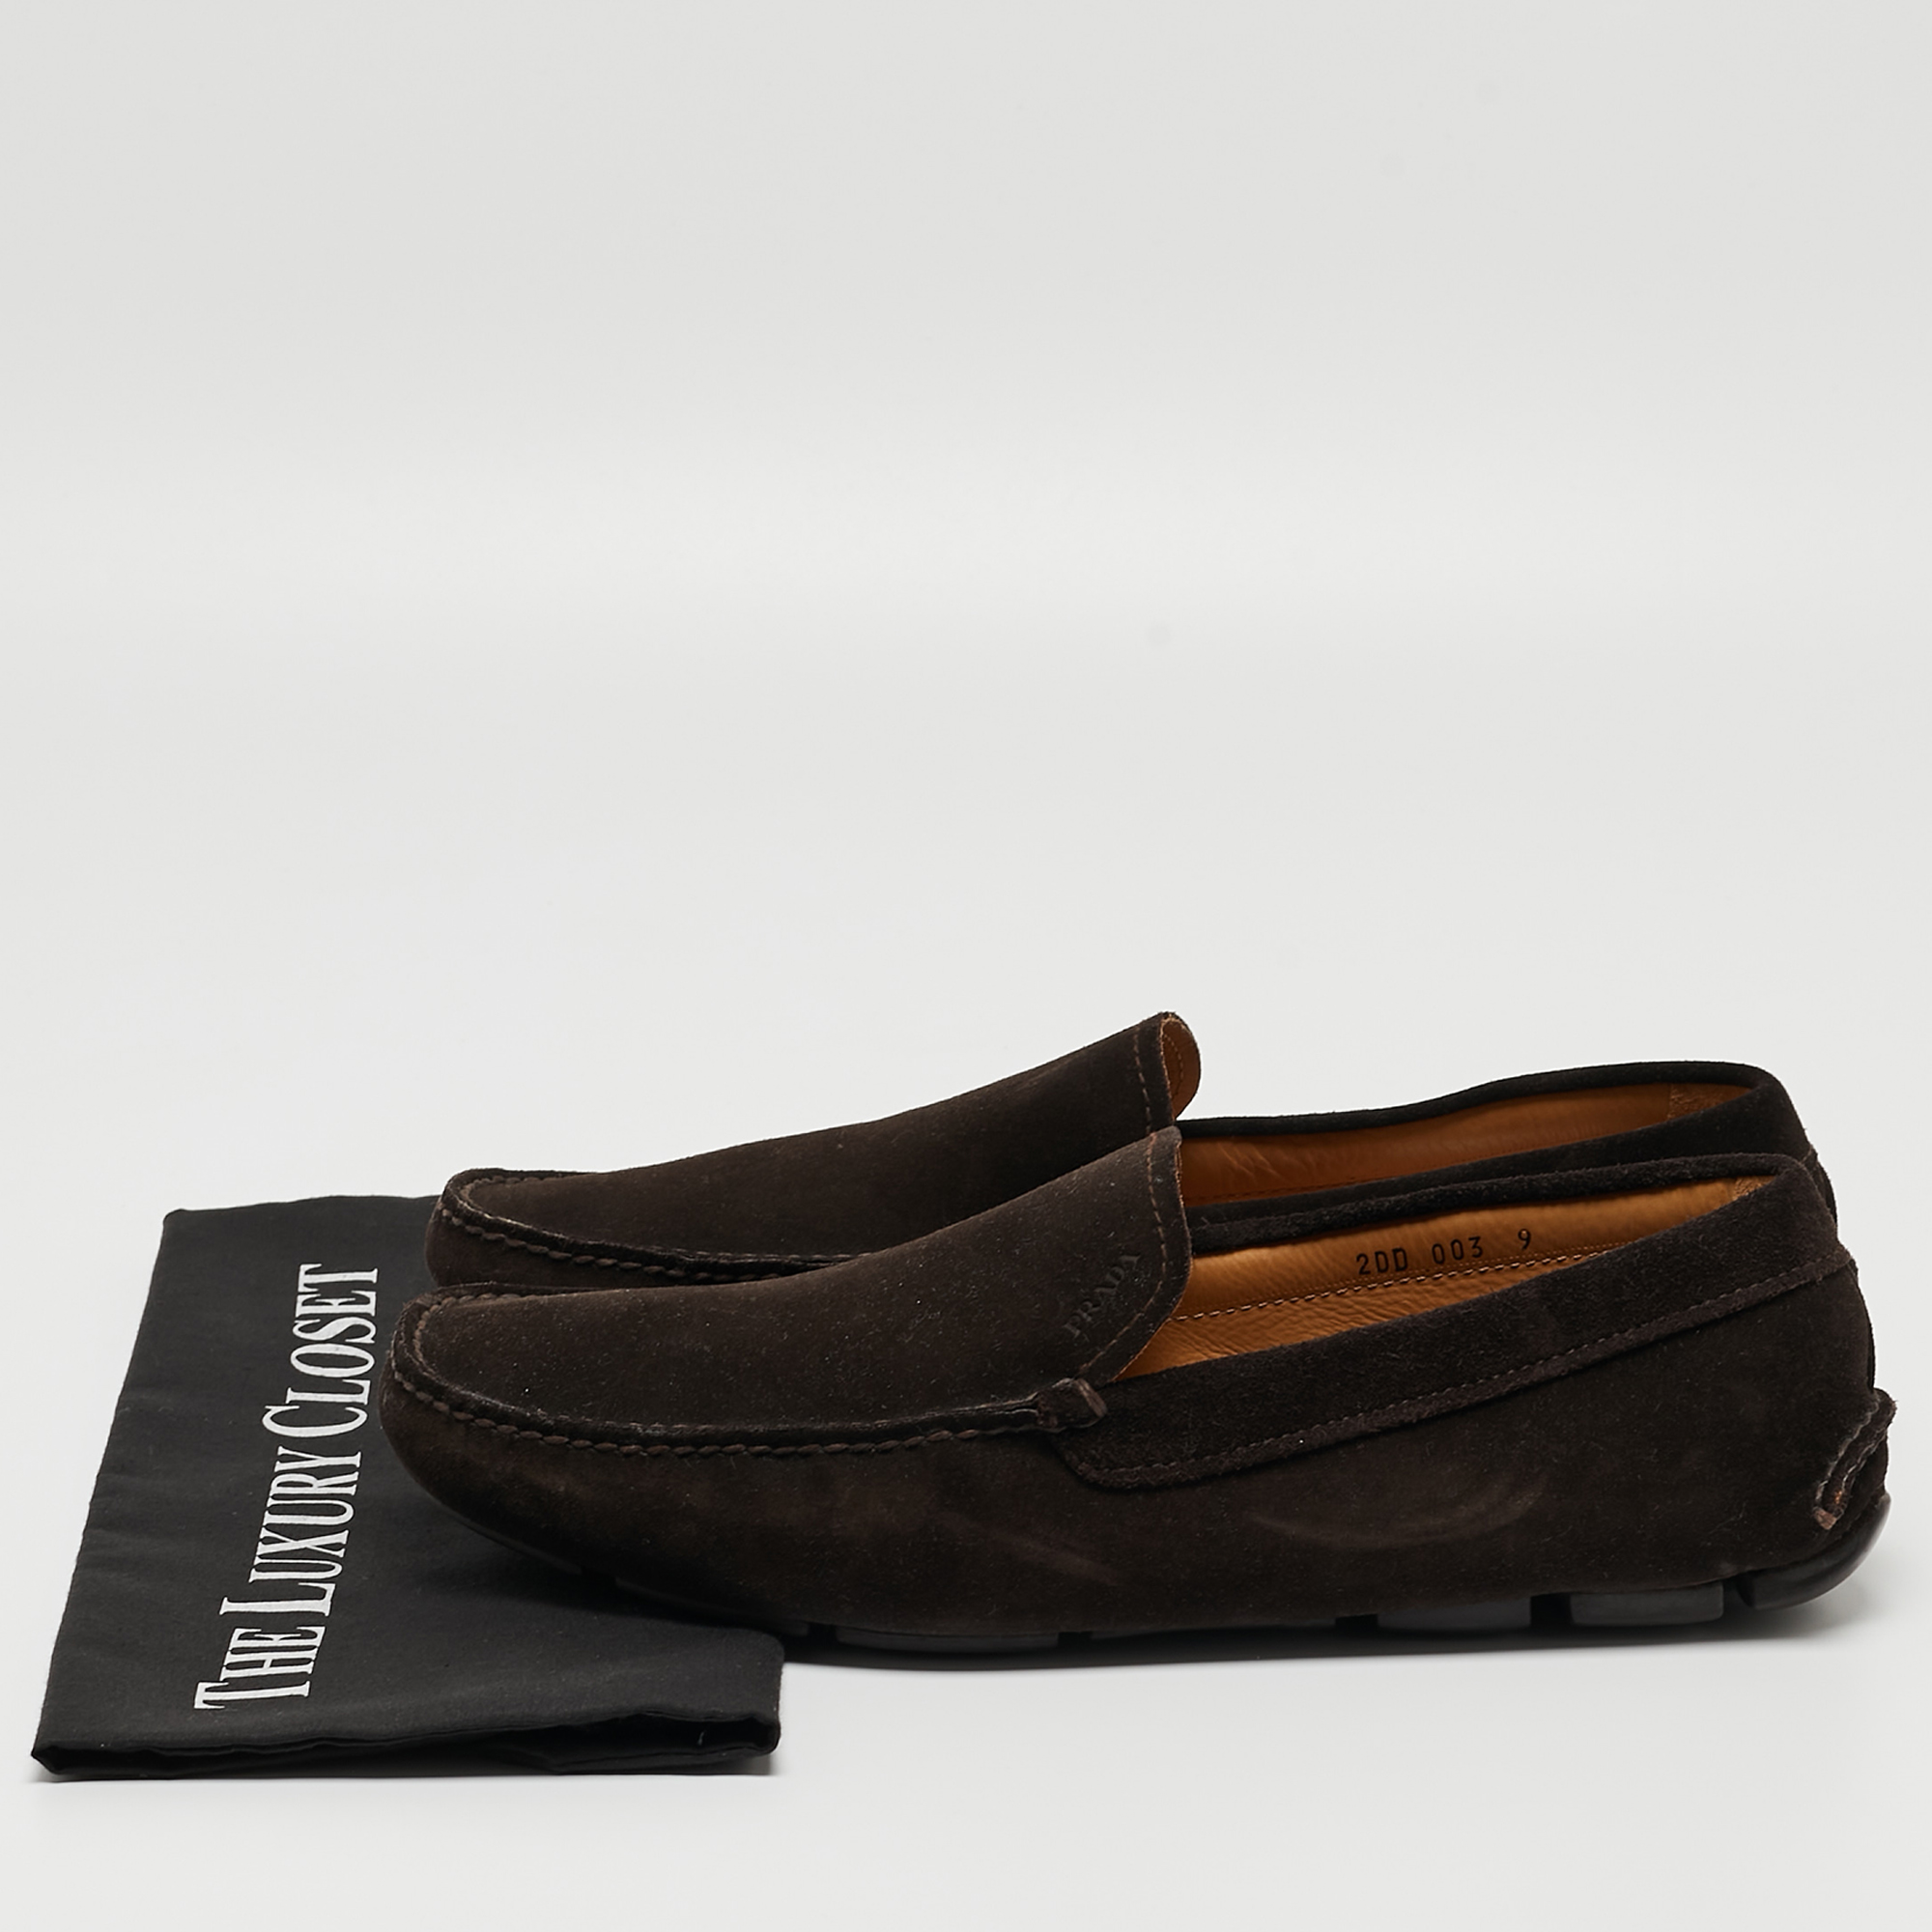 Prada Brown Suede Slip On Loafers Size 43